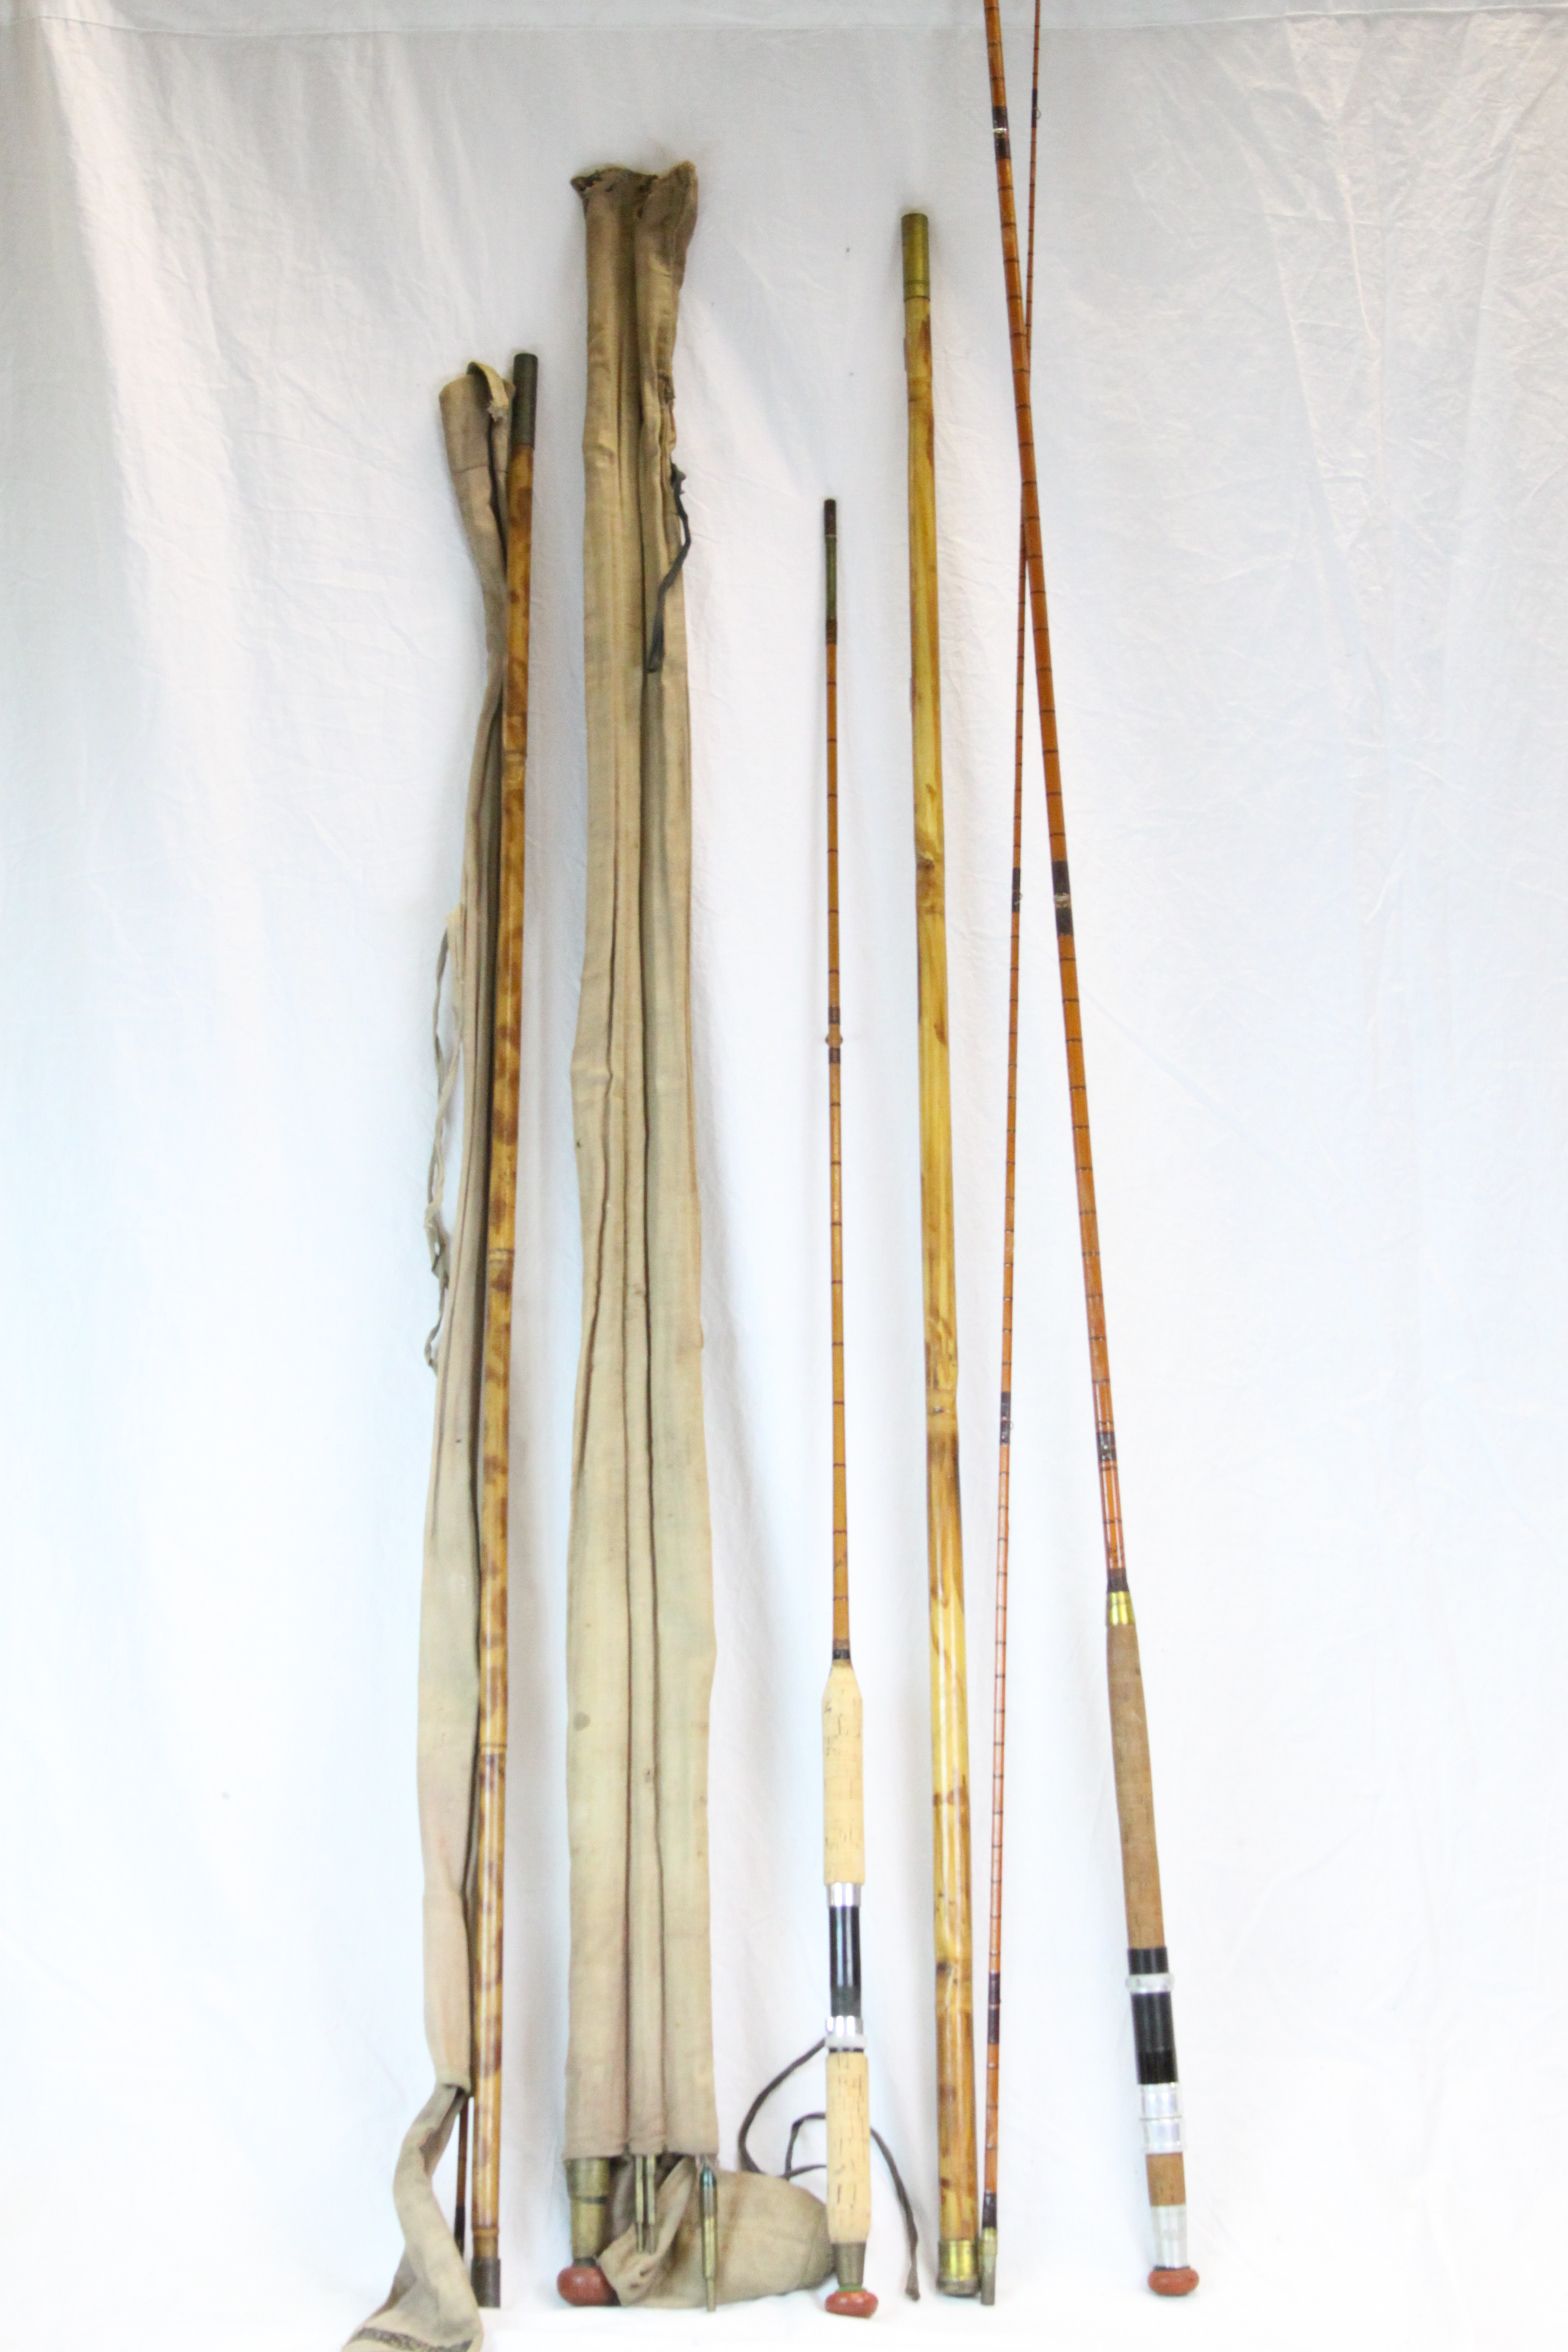 Split cane 'The Light Caster' two piece Allcock spinning rod with bag, a 20th century Hardy split